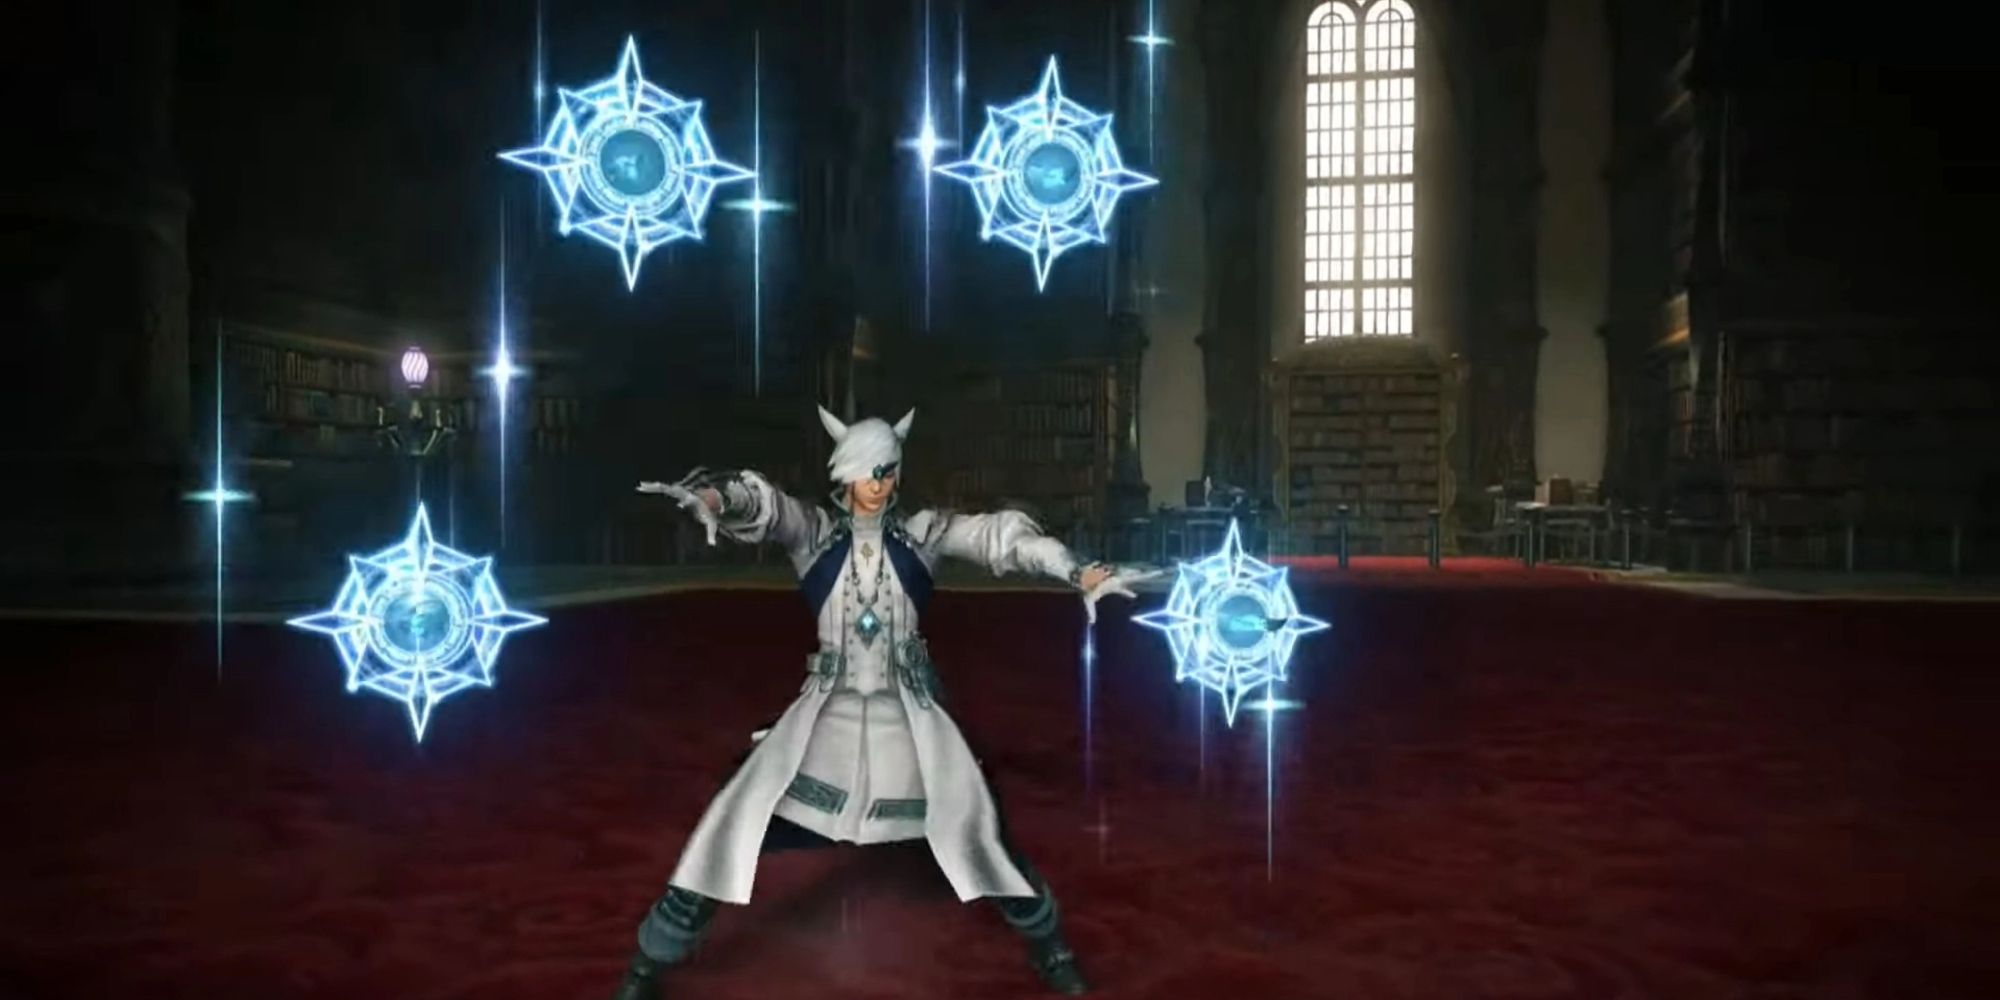 A Sage with their Nouliths drawn, creating a unique pattern of light around all four Noulith that look like stars in Final Fantasy 14